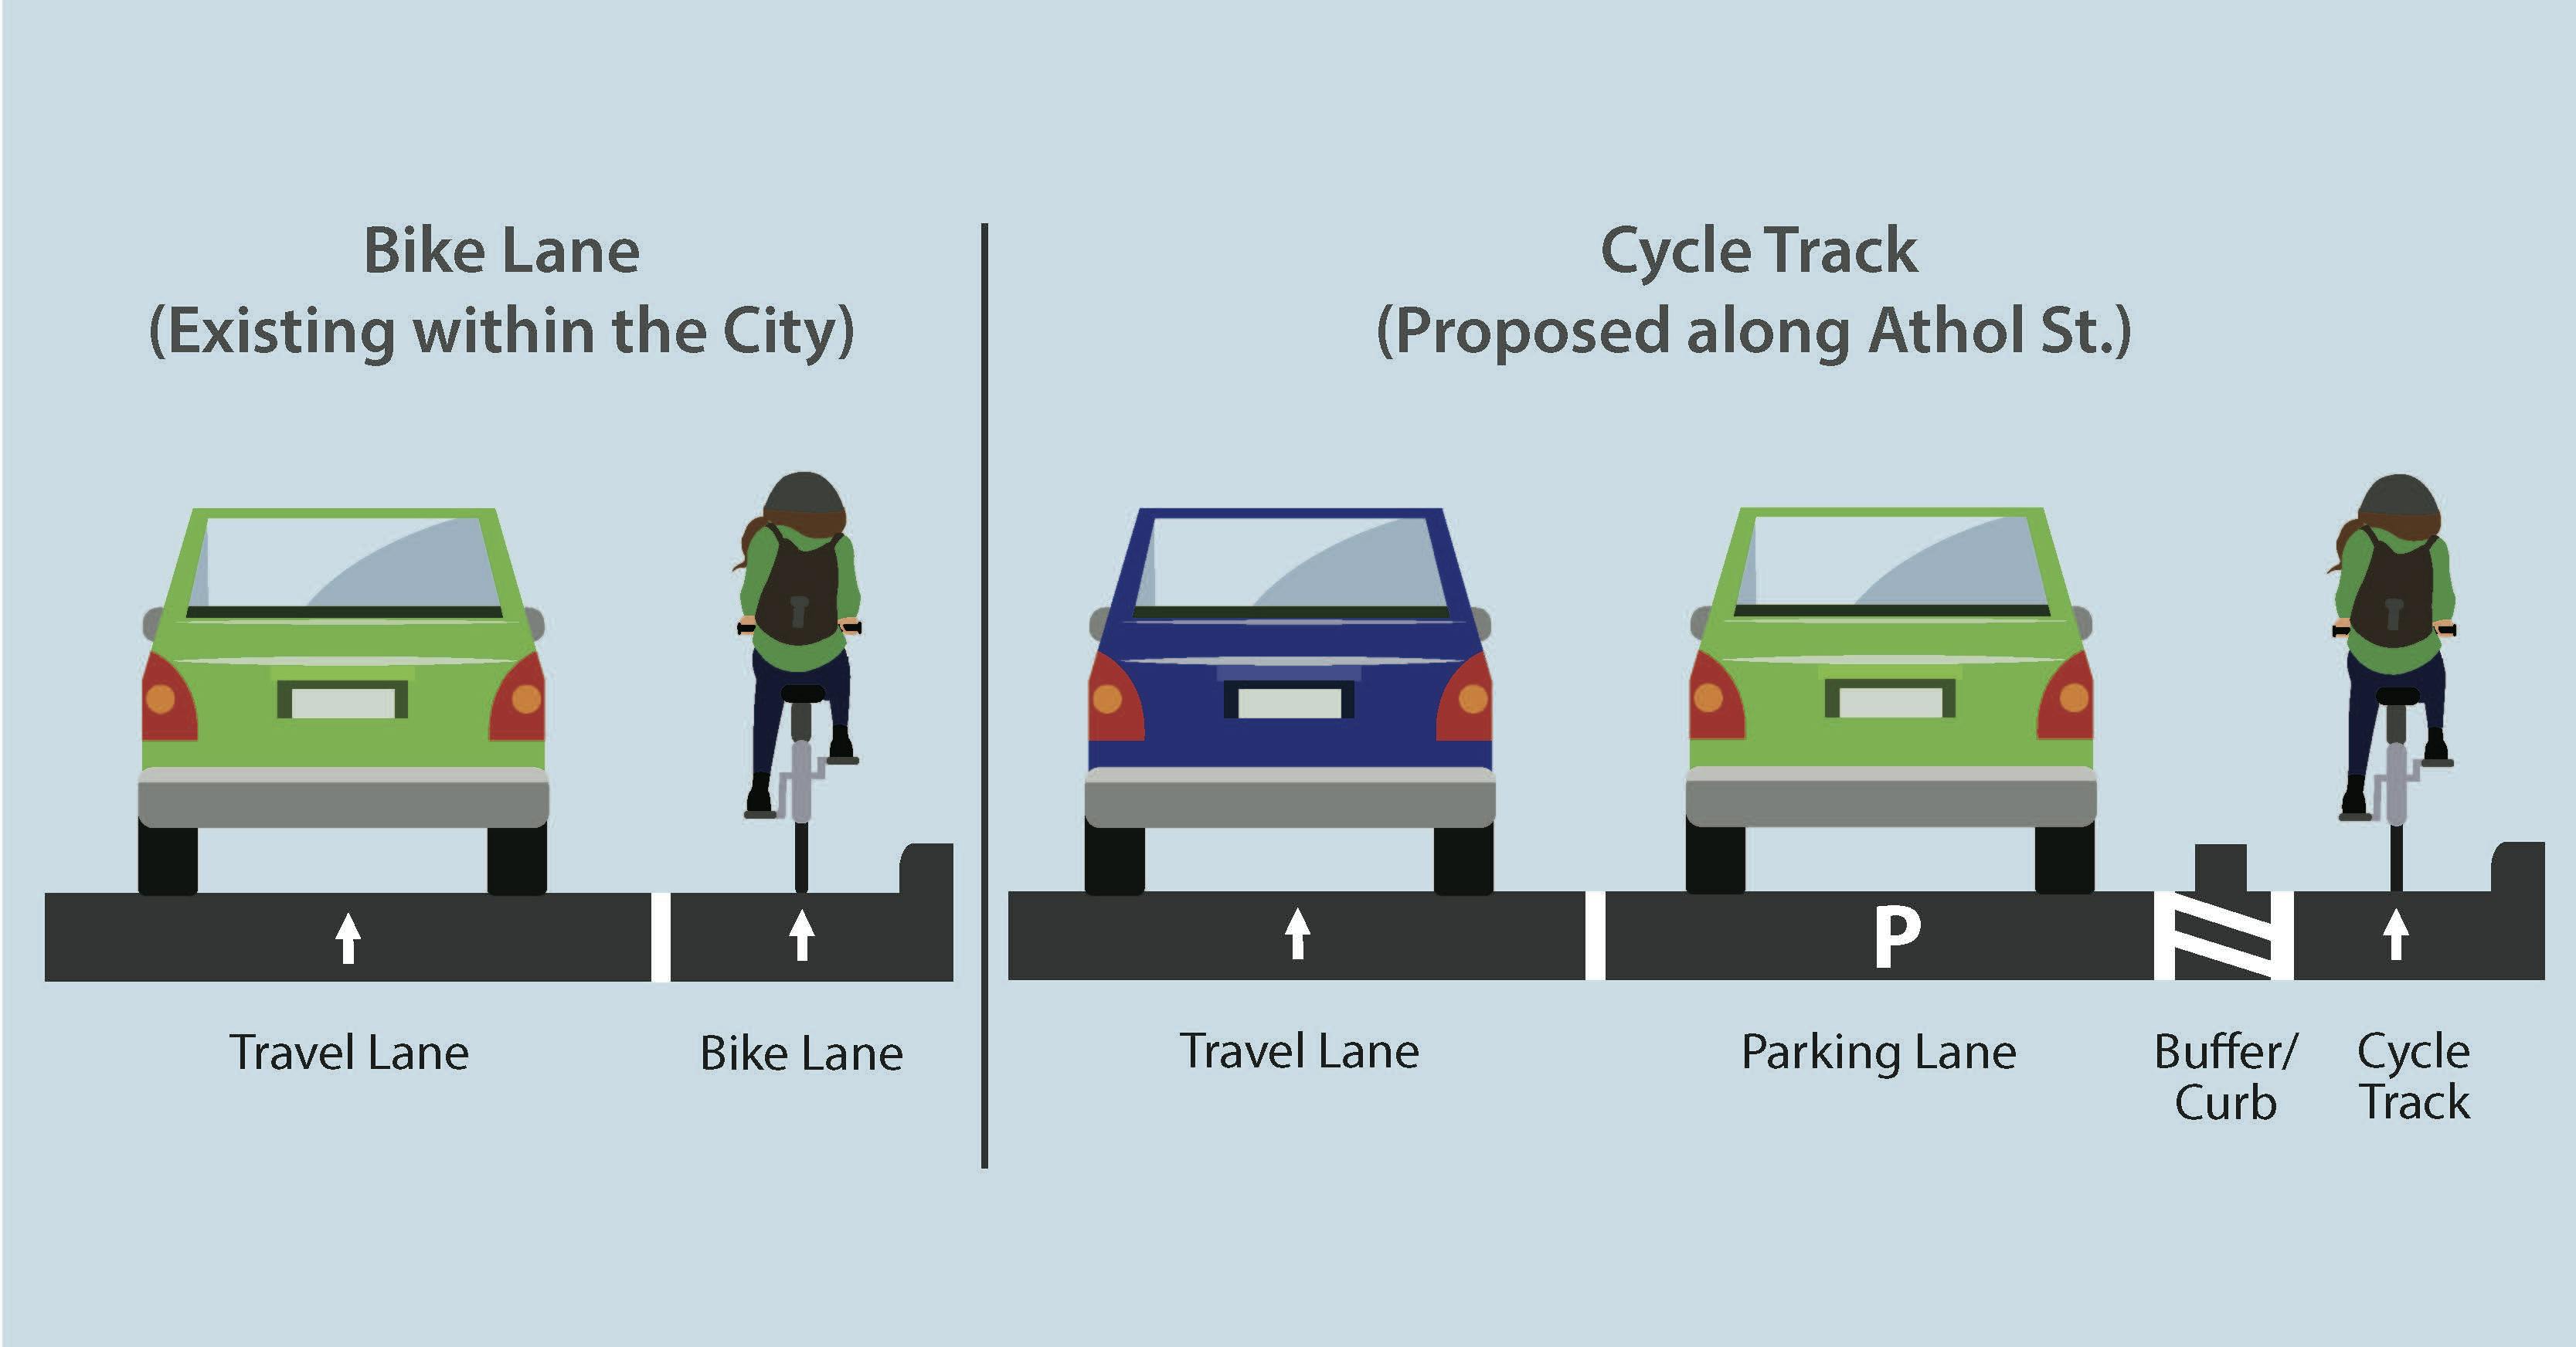 Illustration to show what an existing bike lane looks like in the City of Oshawa and what the proposed Cycle Track along Athol Street would look like.